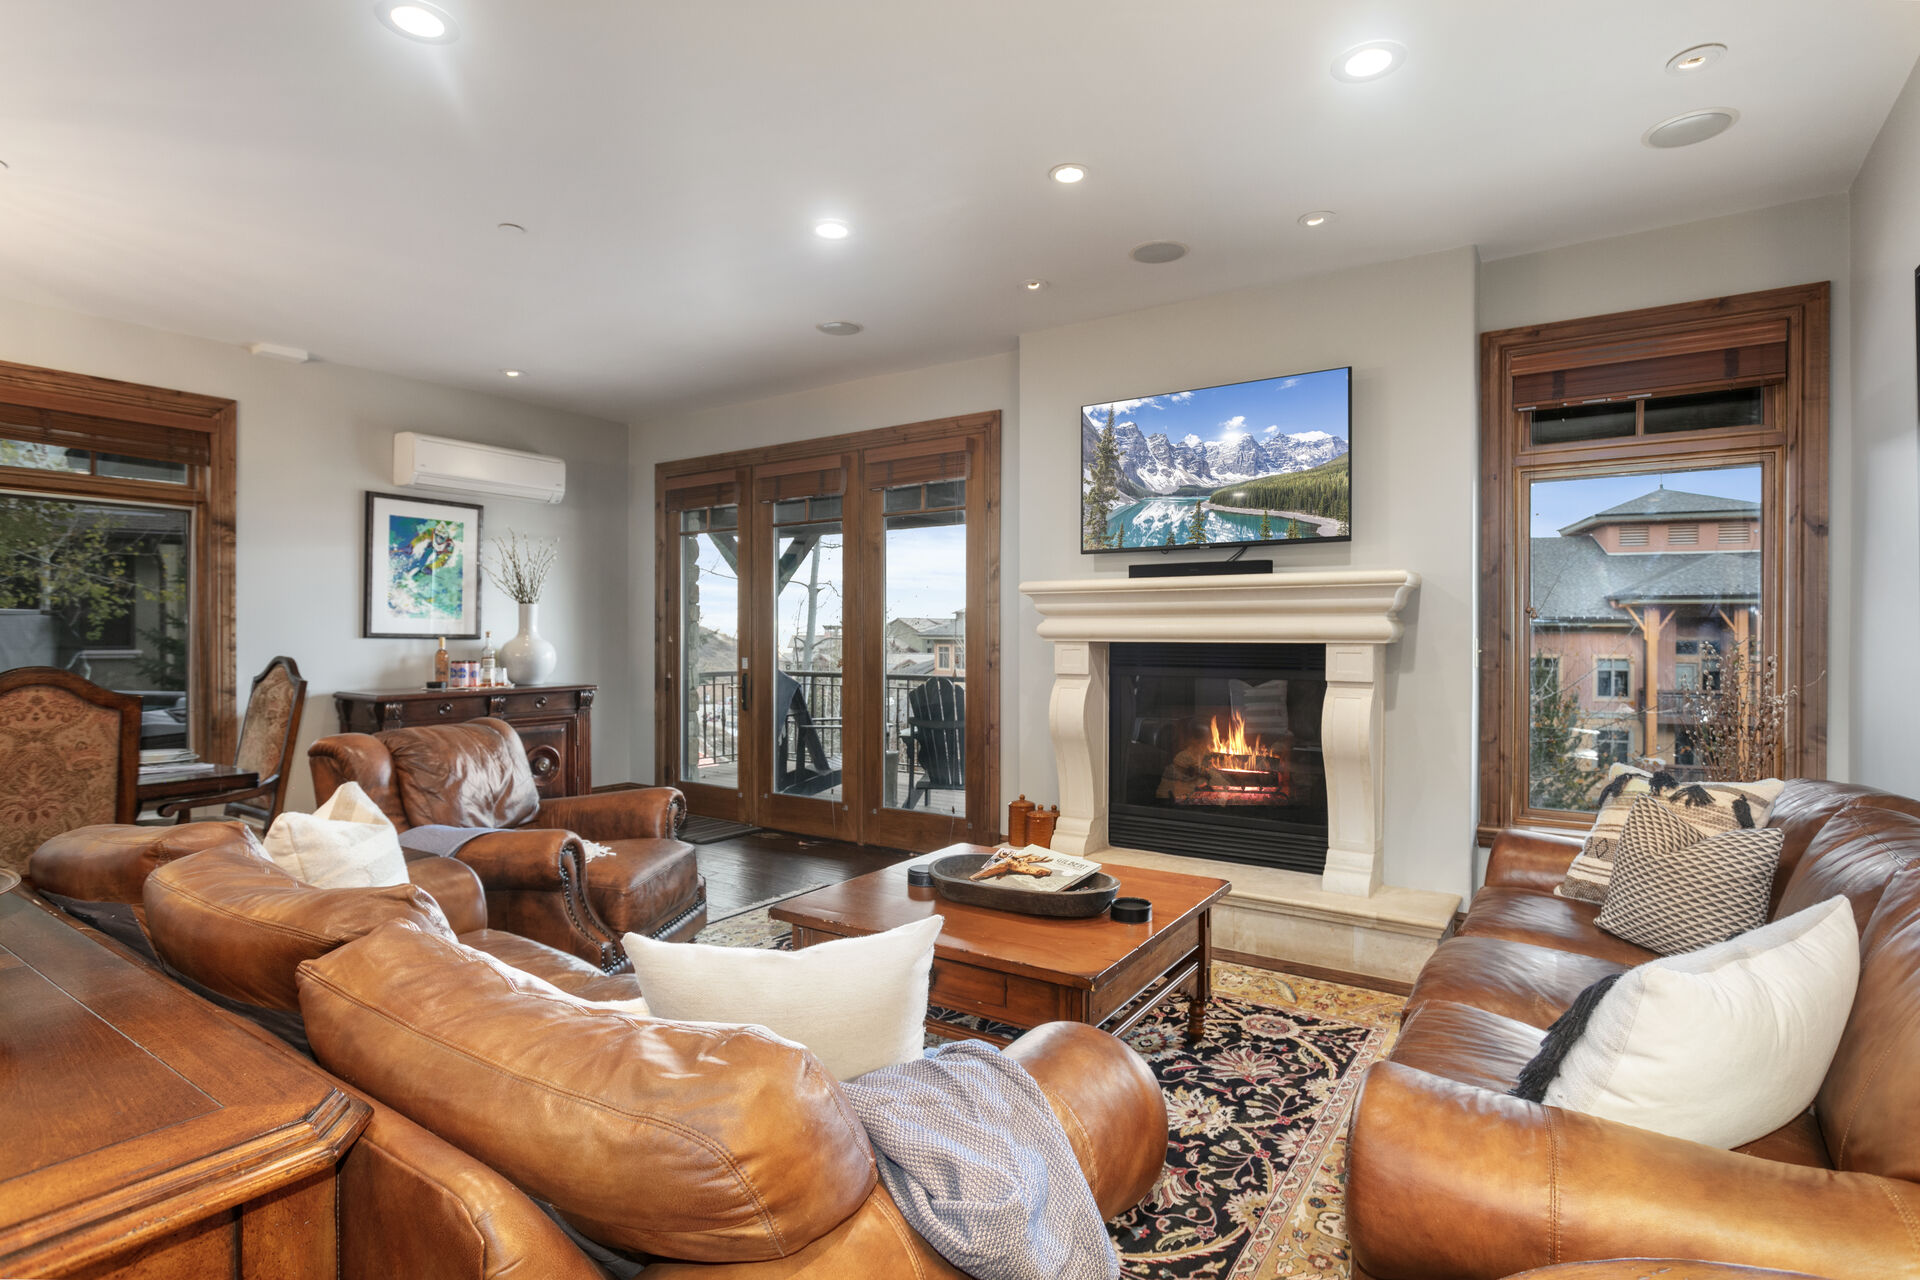 Relaxing living room with TV and fireplace, surround sound speakers and outdoor porch with views!